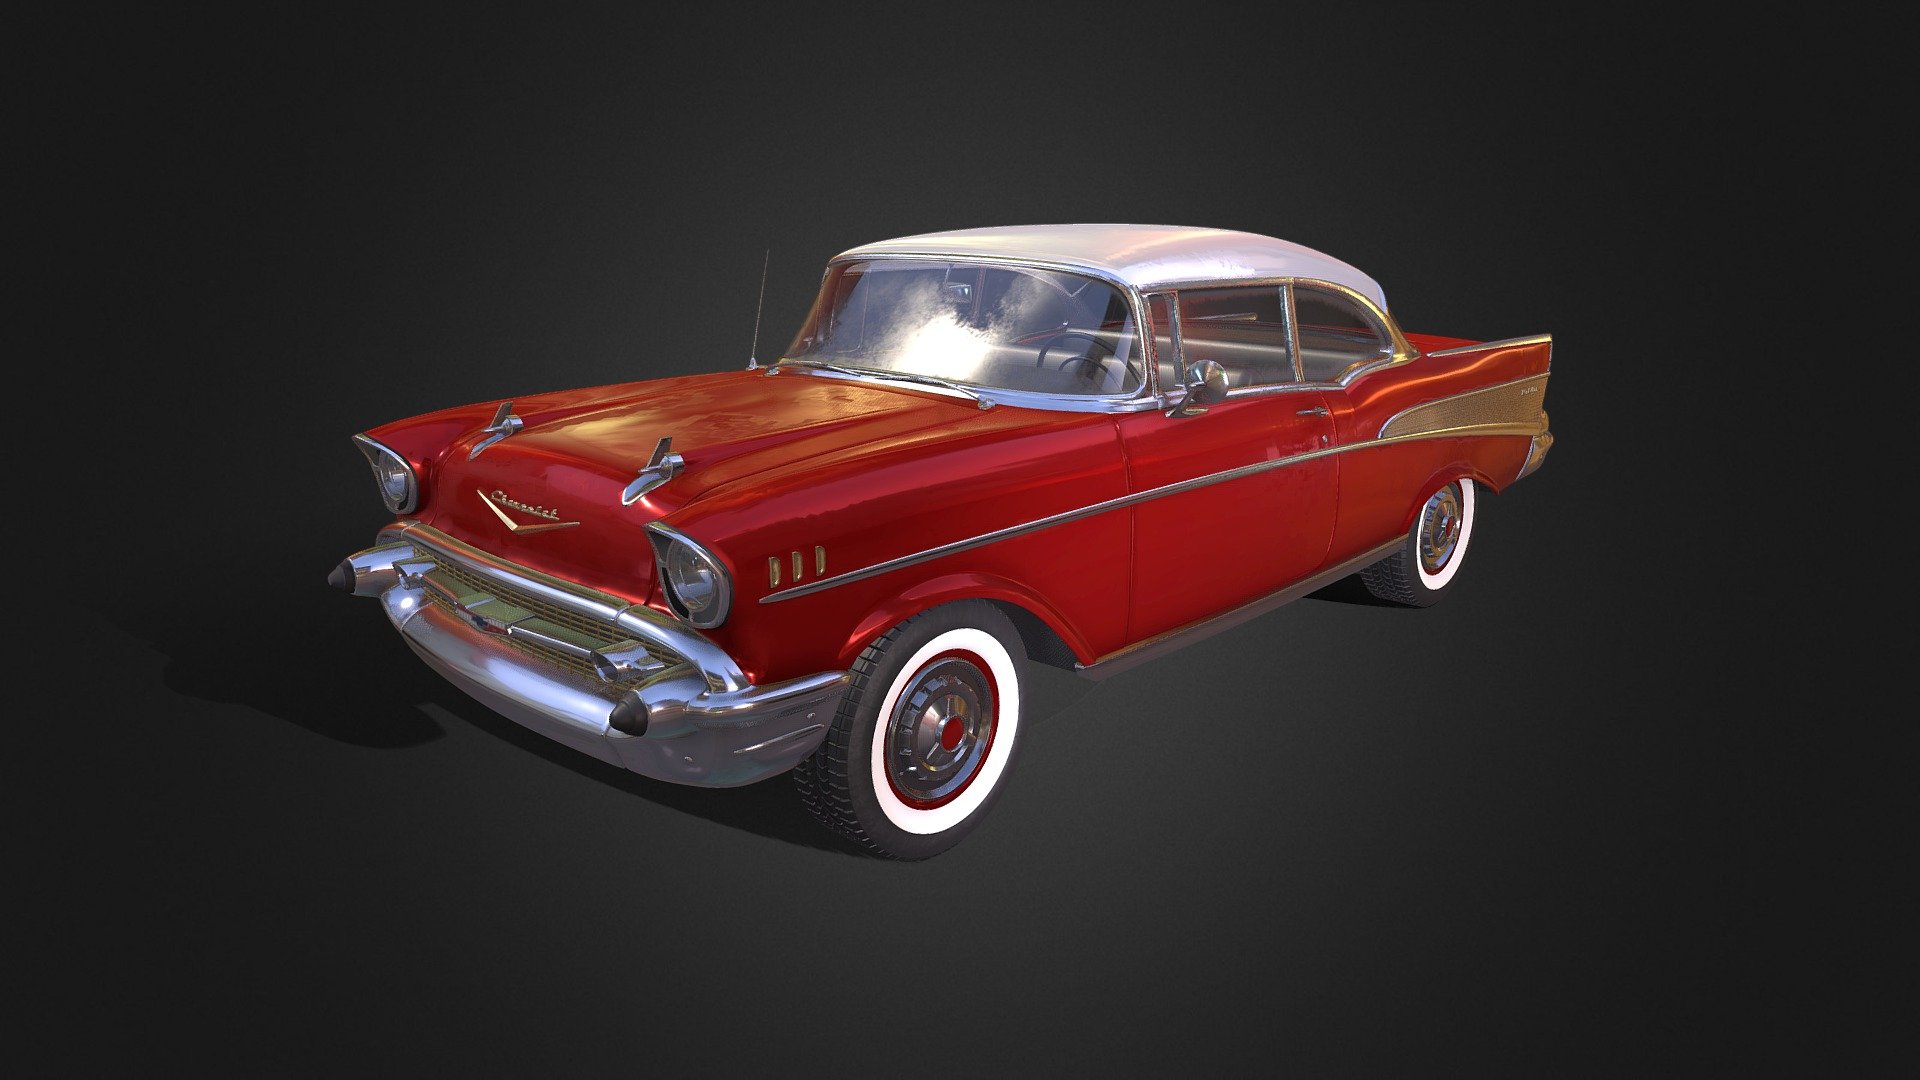 Highpoly model of the vintage car Chevrolet Bel Air 1957.

Modeled in Maya. Textured in Substance Painter 3d model